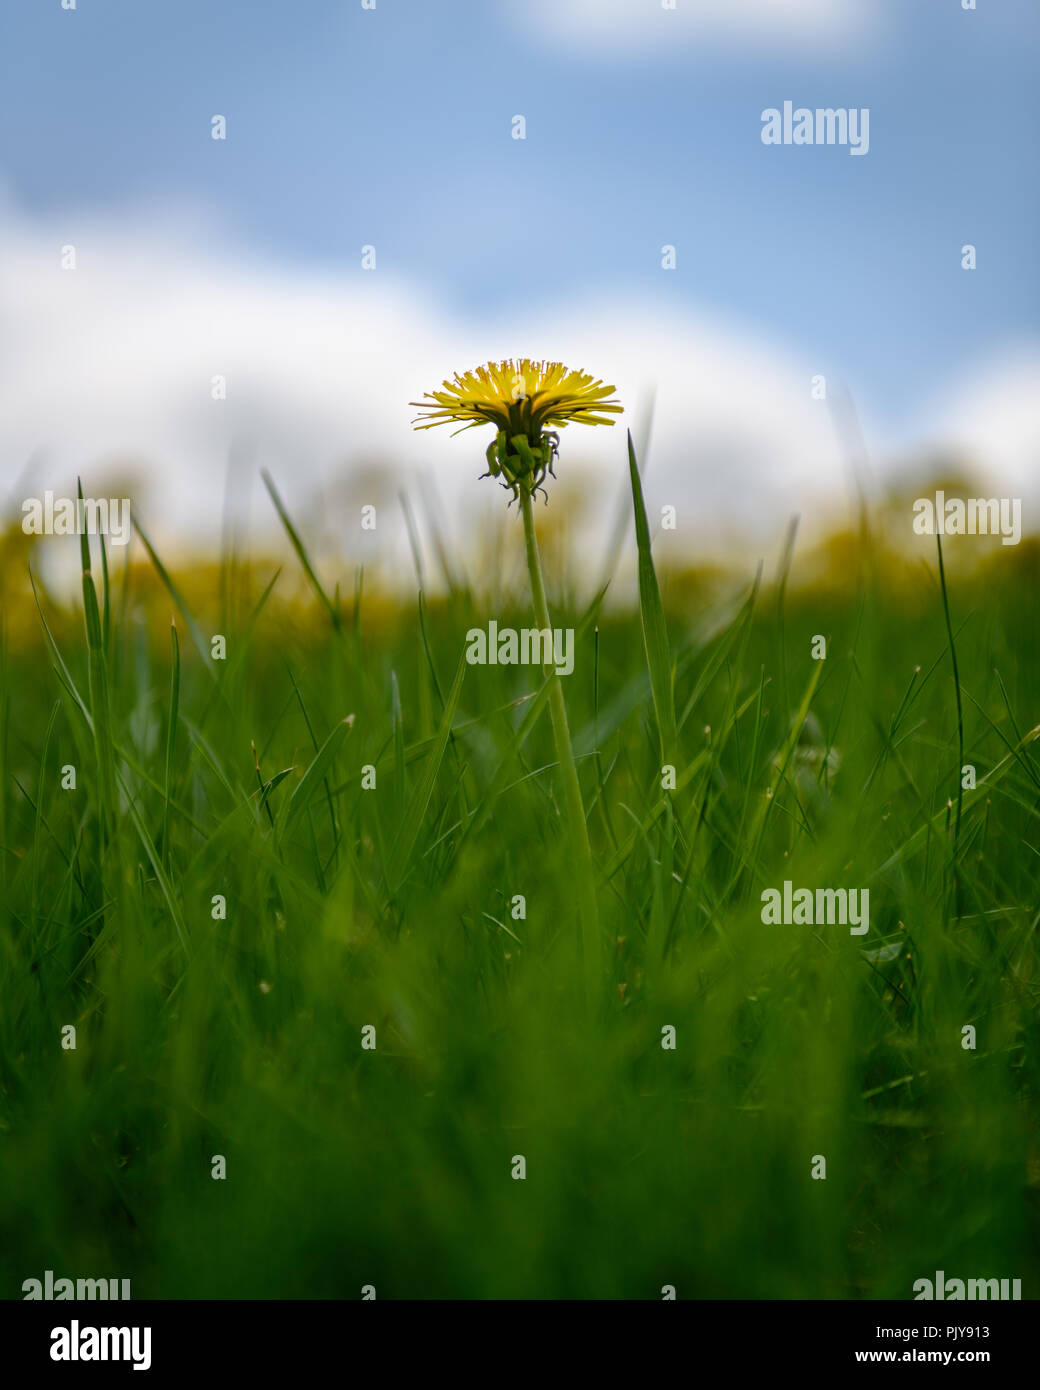 Single Dandelion Poking Up Over The Grass With Dandelions And The Sky In The Background Stock Photo